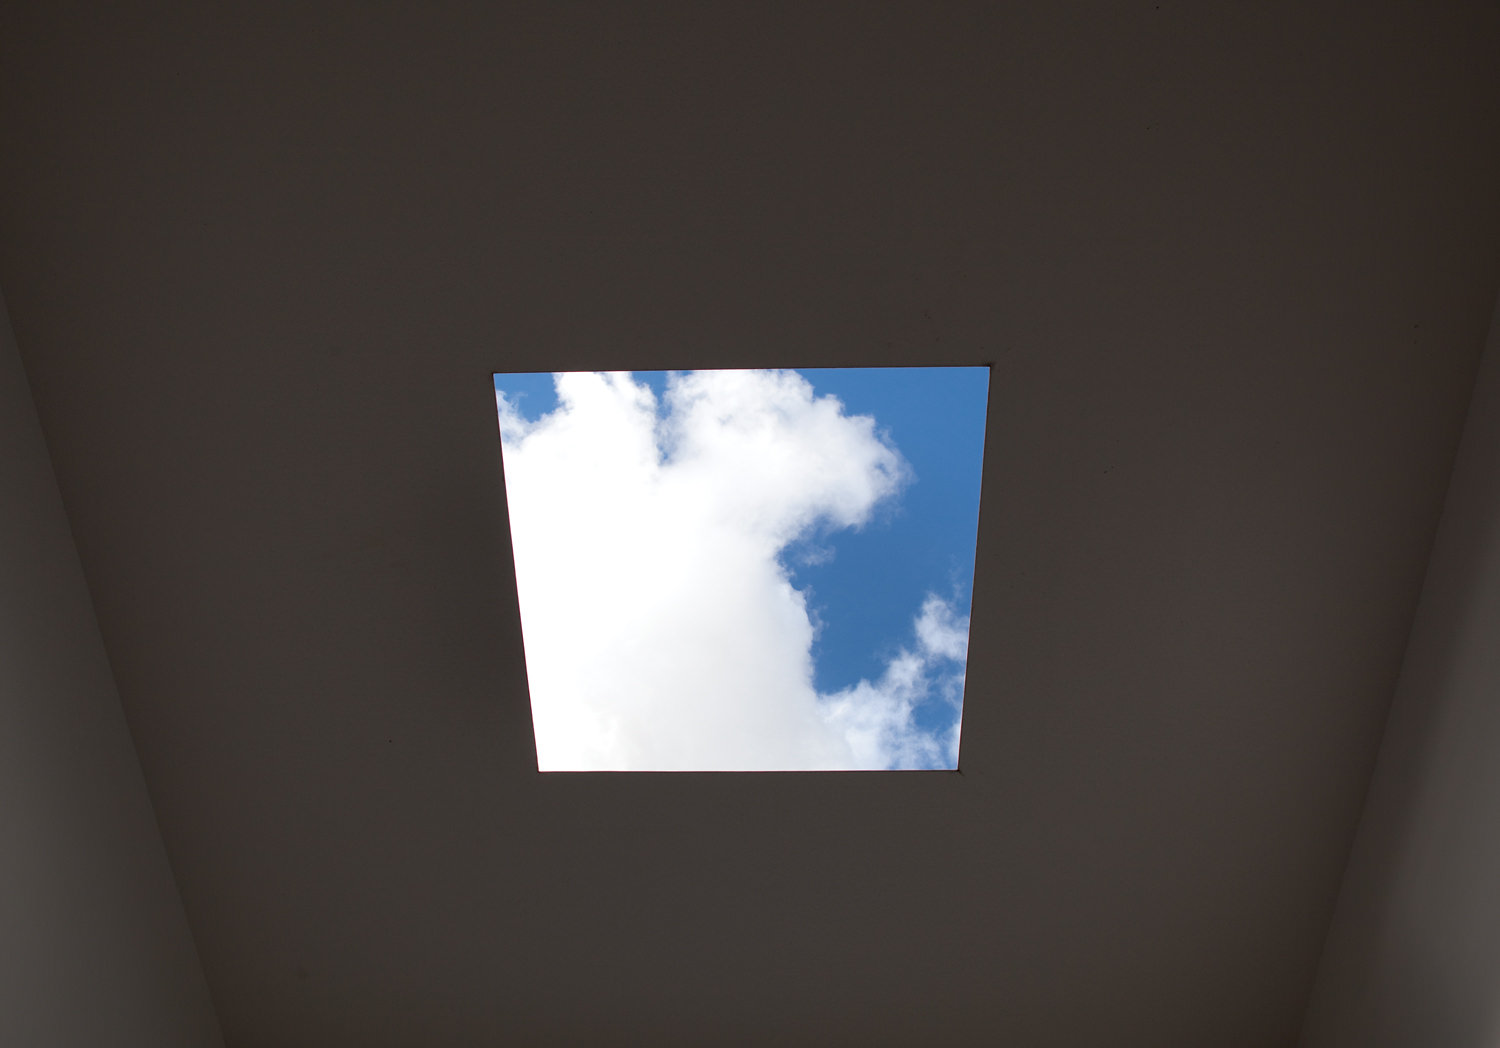 The view through a square hole in the roof of Skyspace, showing a blue sky with clouds.